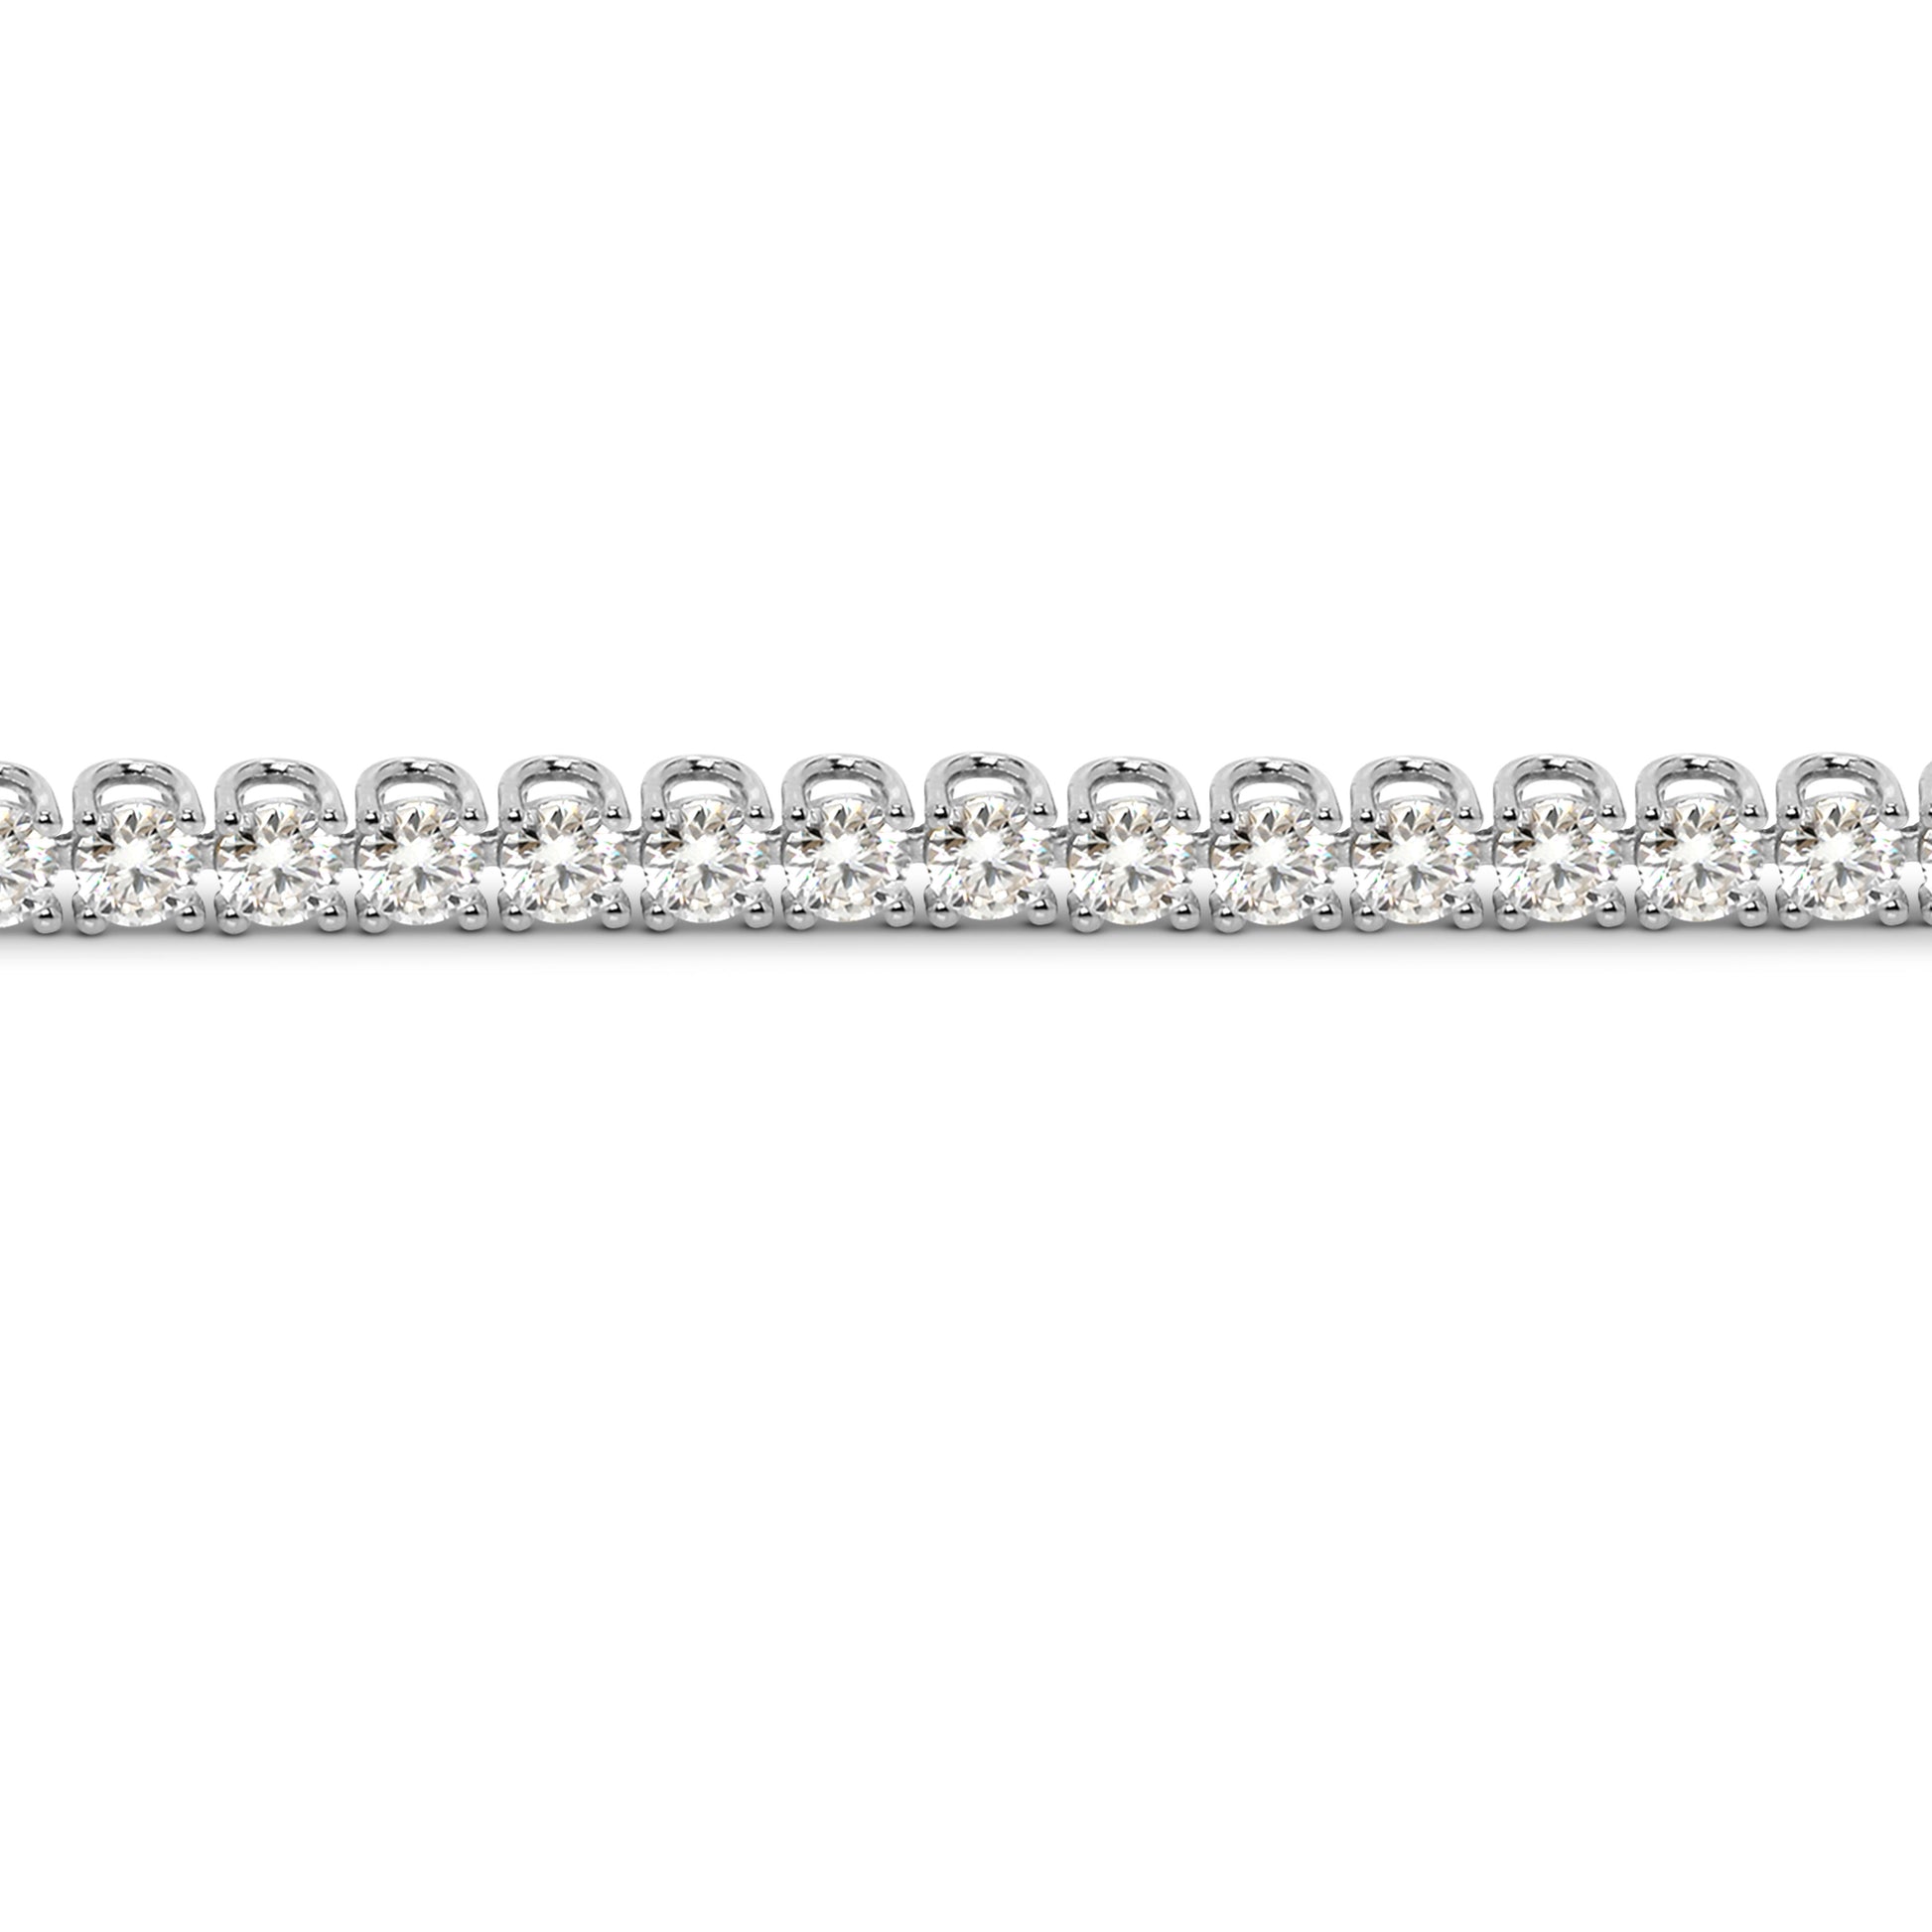 Scoop Link Tennis Bracelet | 4.0 mm | 4 Prong U-Shape Setting | 7.0 Inches | 925 Sterling Silver with Platinum Plating or 24K Gold Plating - Adora Fine Jewelry